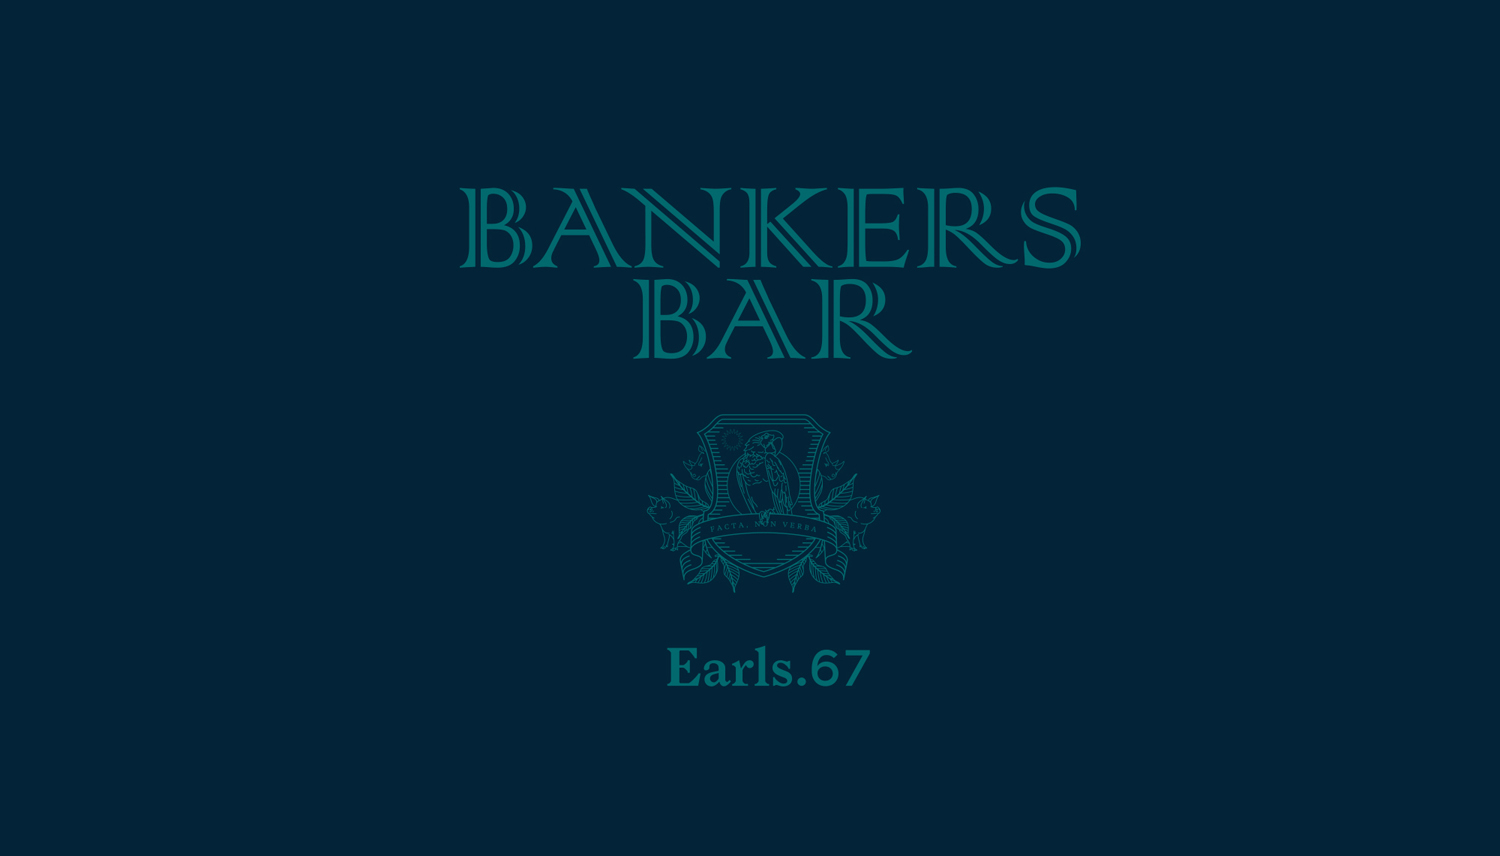 Logo and logotype by Glasfurd & Walker for US and Canadian restaurant chain prototype Earls.67